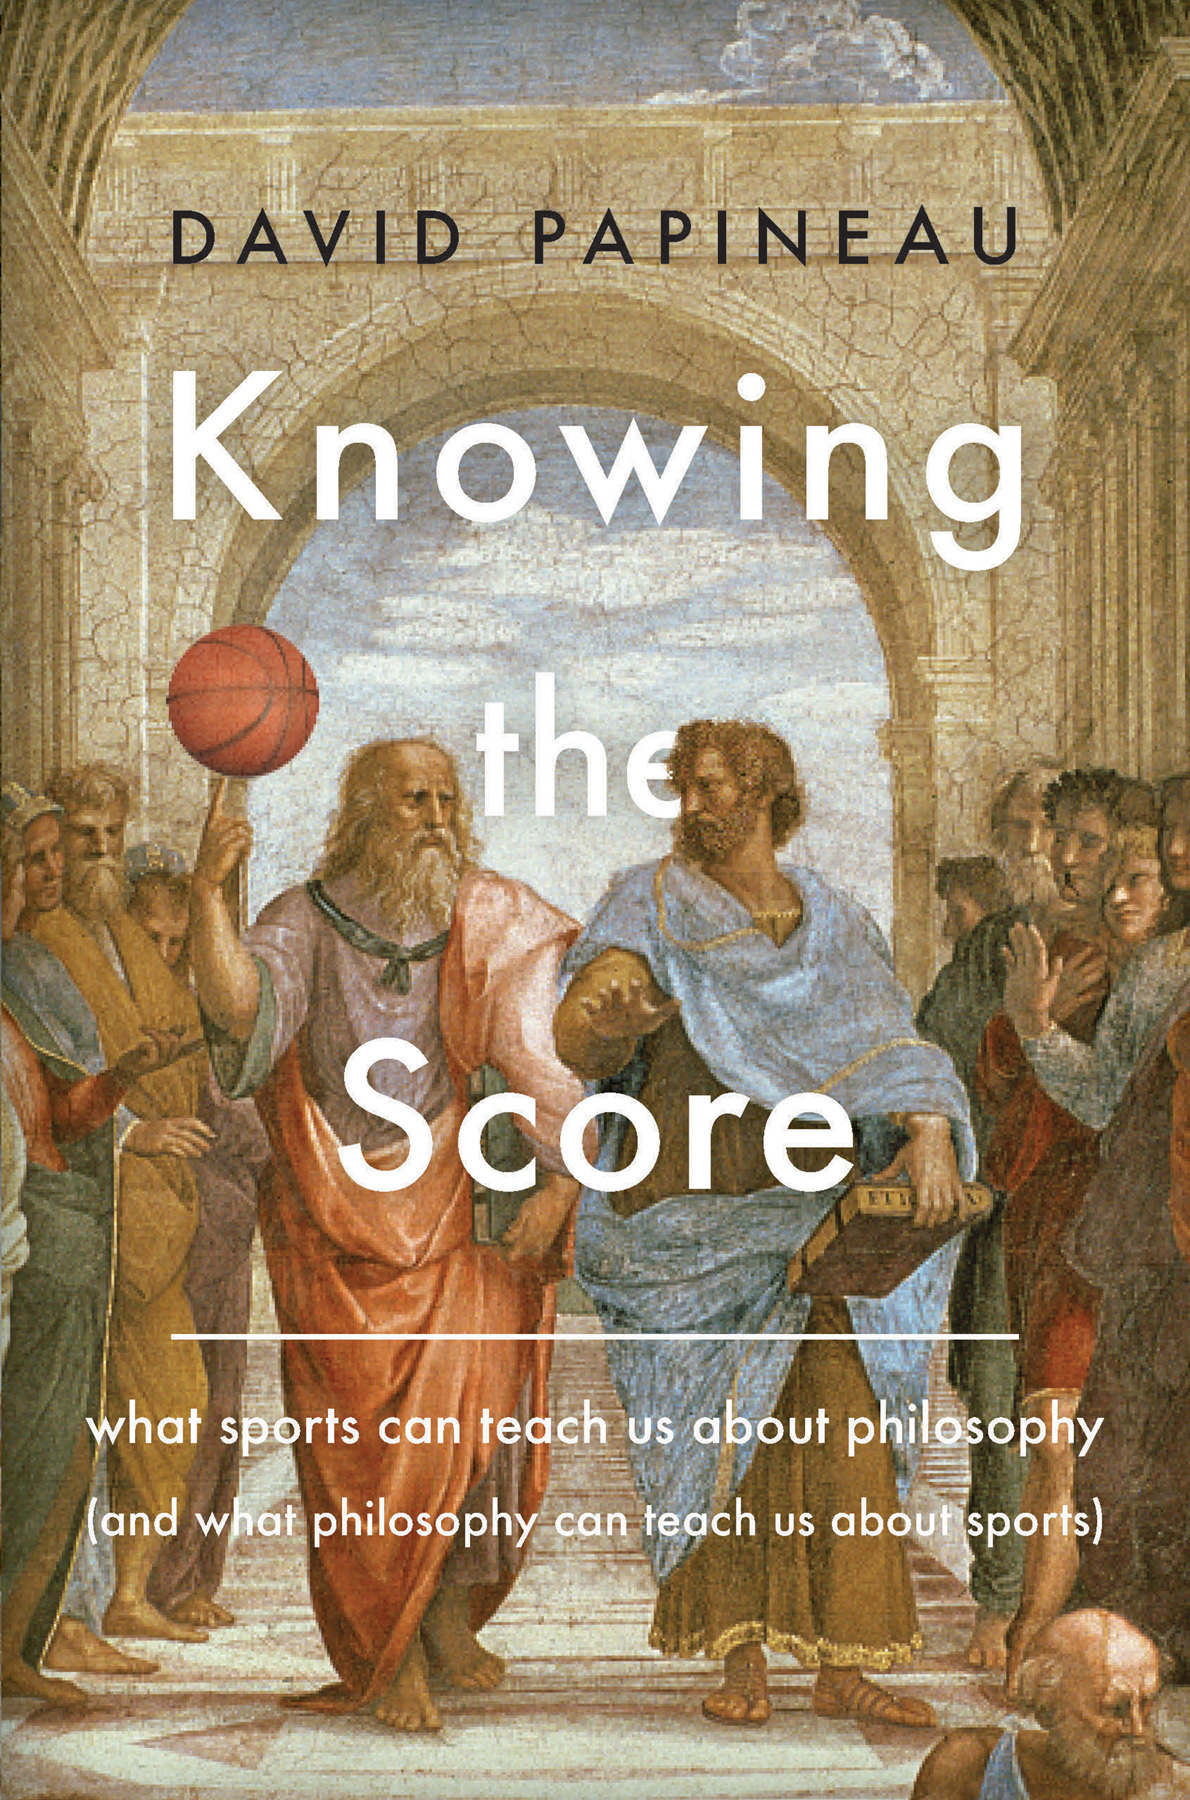 Knowing the Score: What Sports Can Teach Us About Philosophy (And What Philosophy Can Teach Us About Sports)